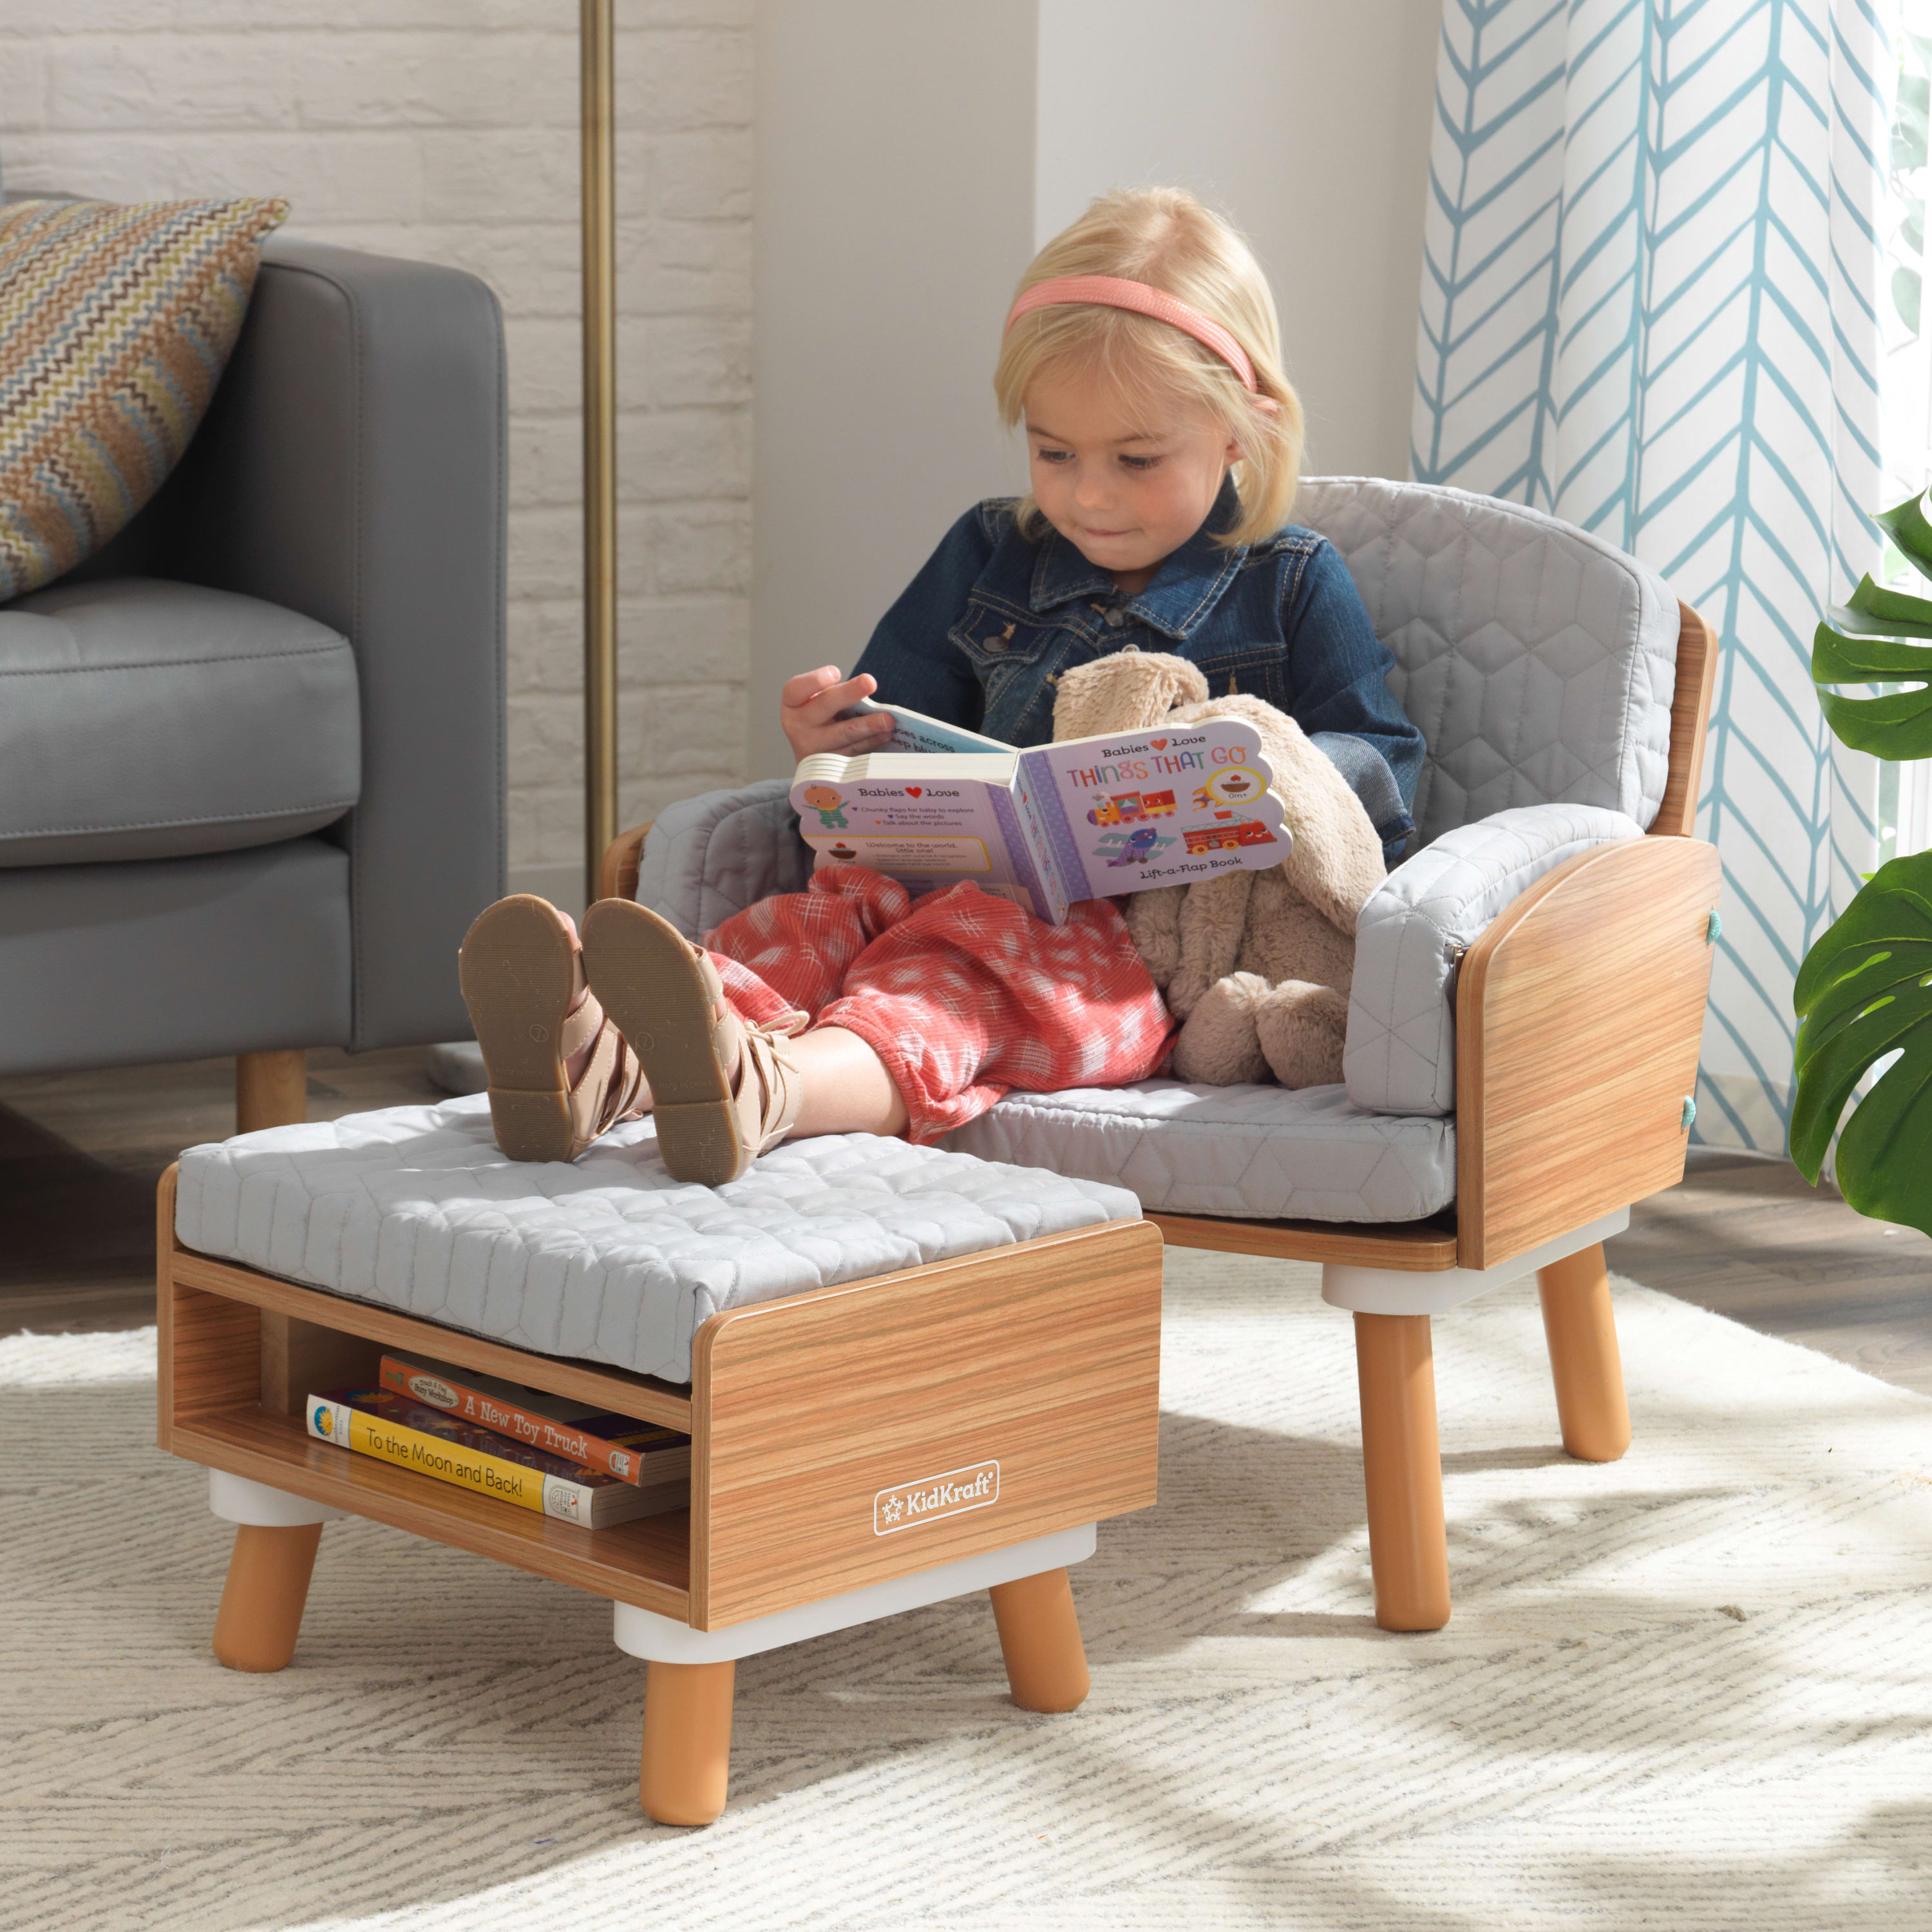 KidKraft Mid-Century kid™ Wooden Reading Chair & Ottoman with Cushions, Gray, Ages 3+ - image 2 of 10